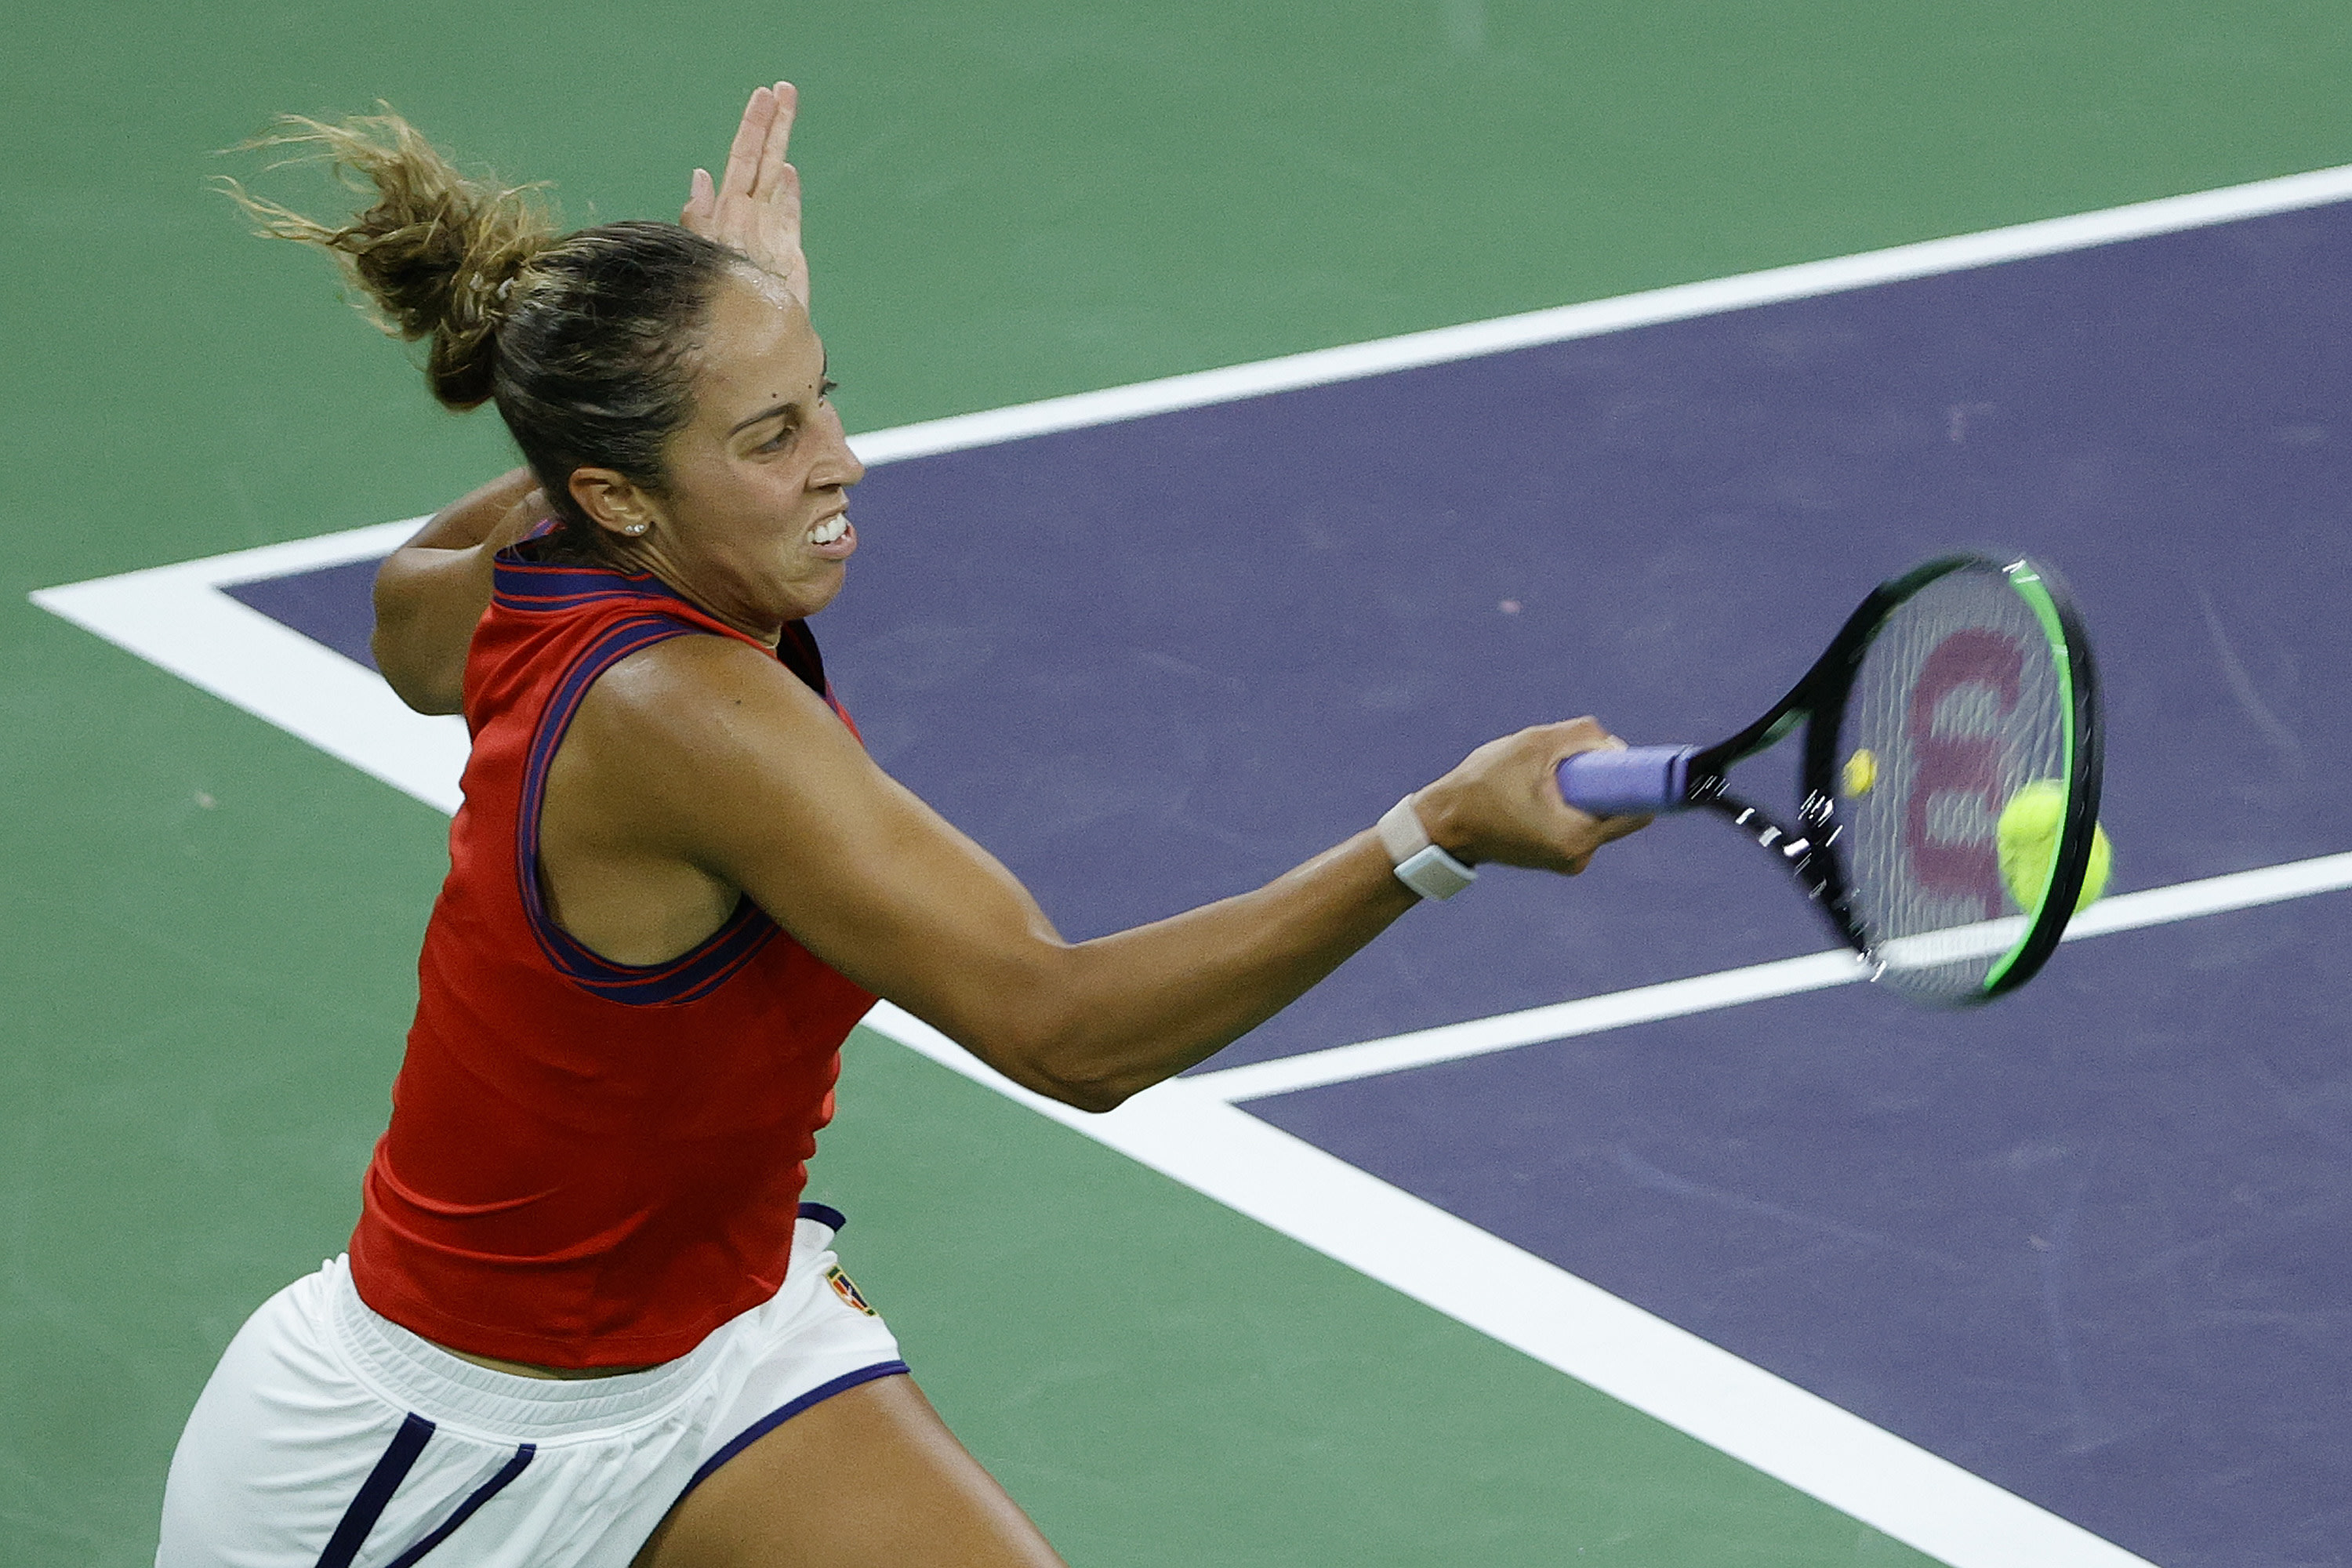 Madison Keys wins first match since Wimbledon over Kaia Kanepi in Indian Wells first round